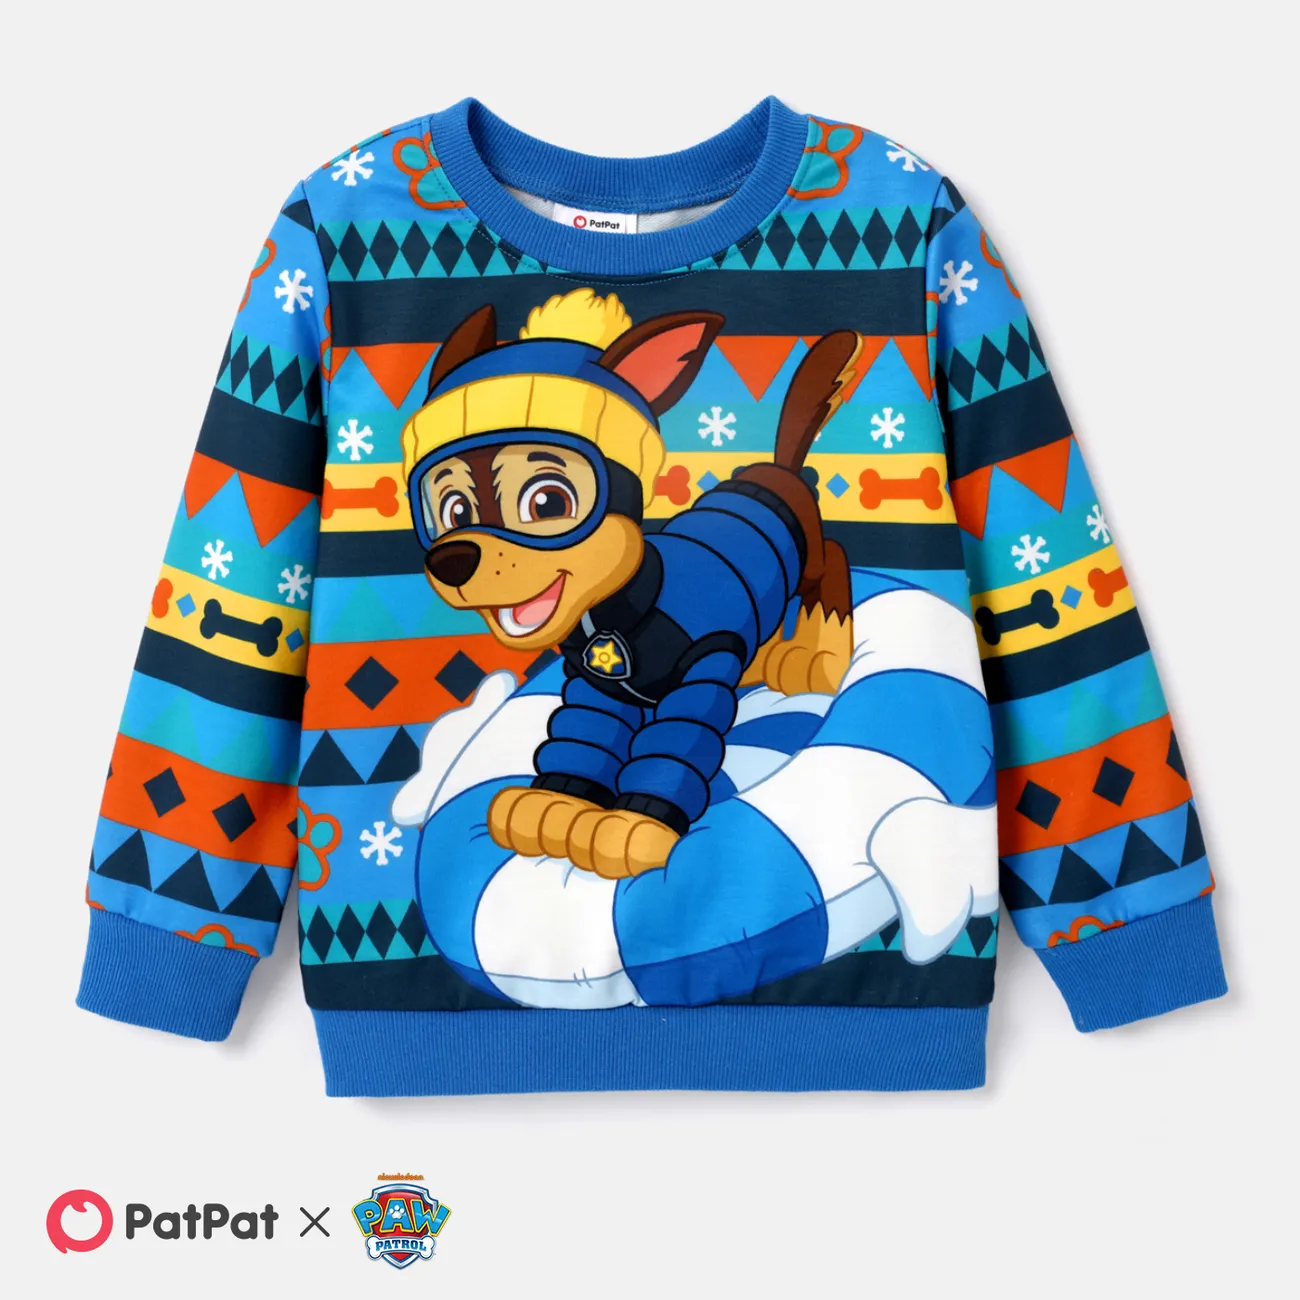 Mobile Patrol US $9.99 Long-sleeve Pullover Only Sweatshirt Toddler PatPat Print Character Girl/Boy PAW